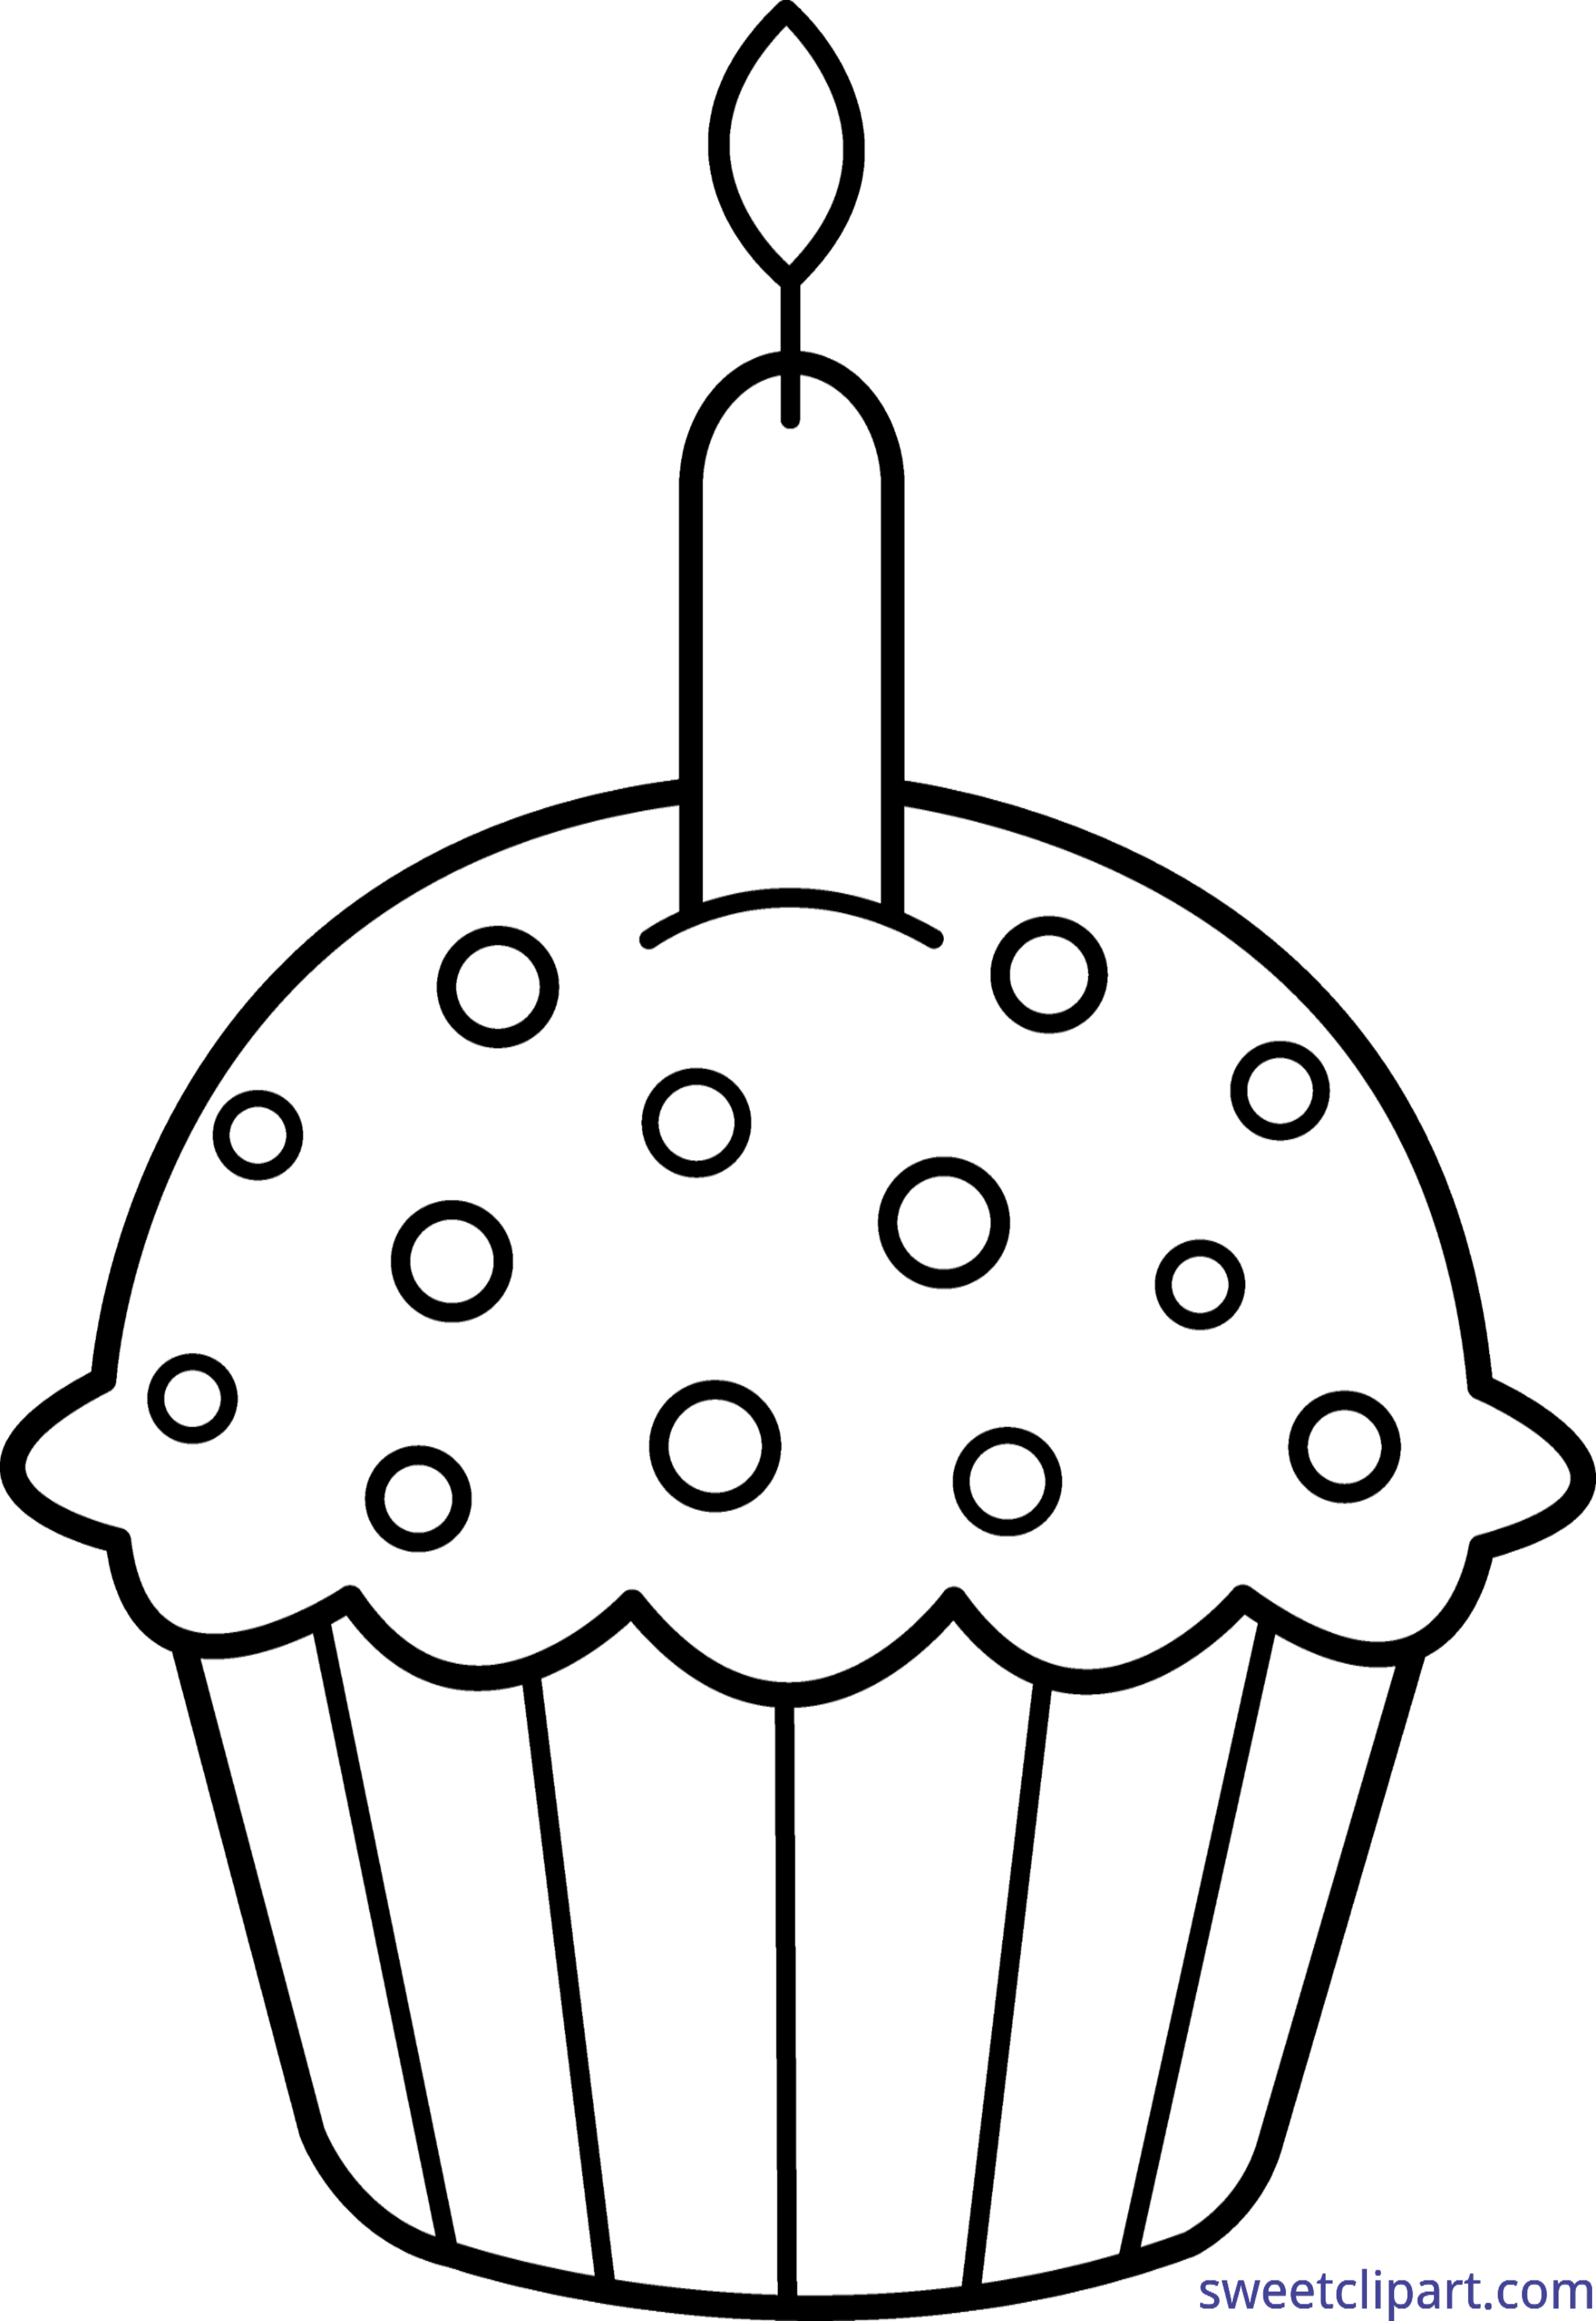 Birthday coloring page clip. Muffins clipart cupcake tumblr